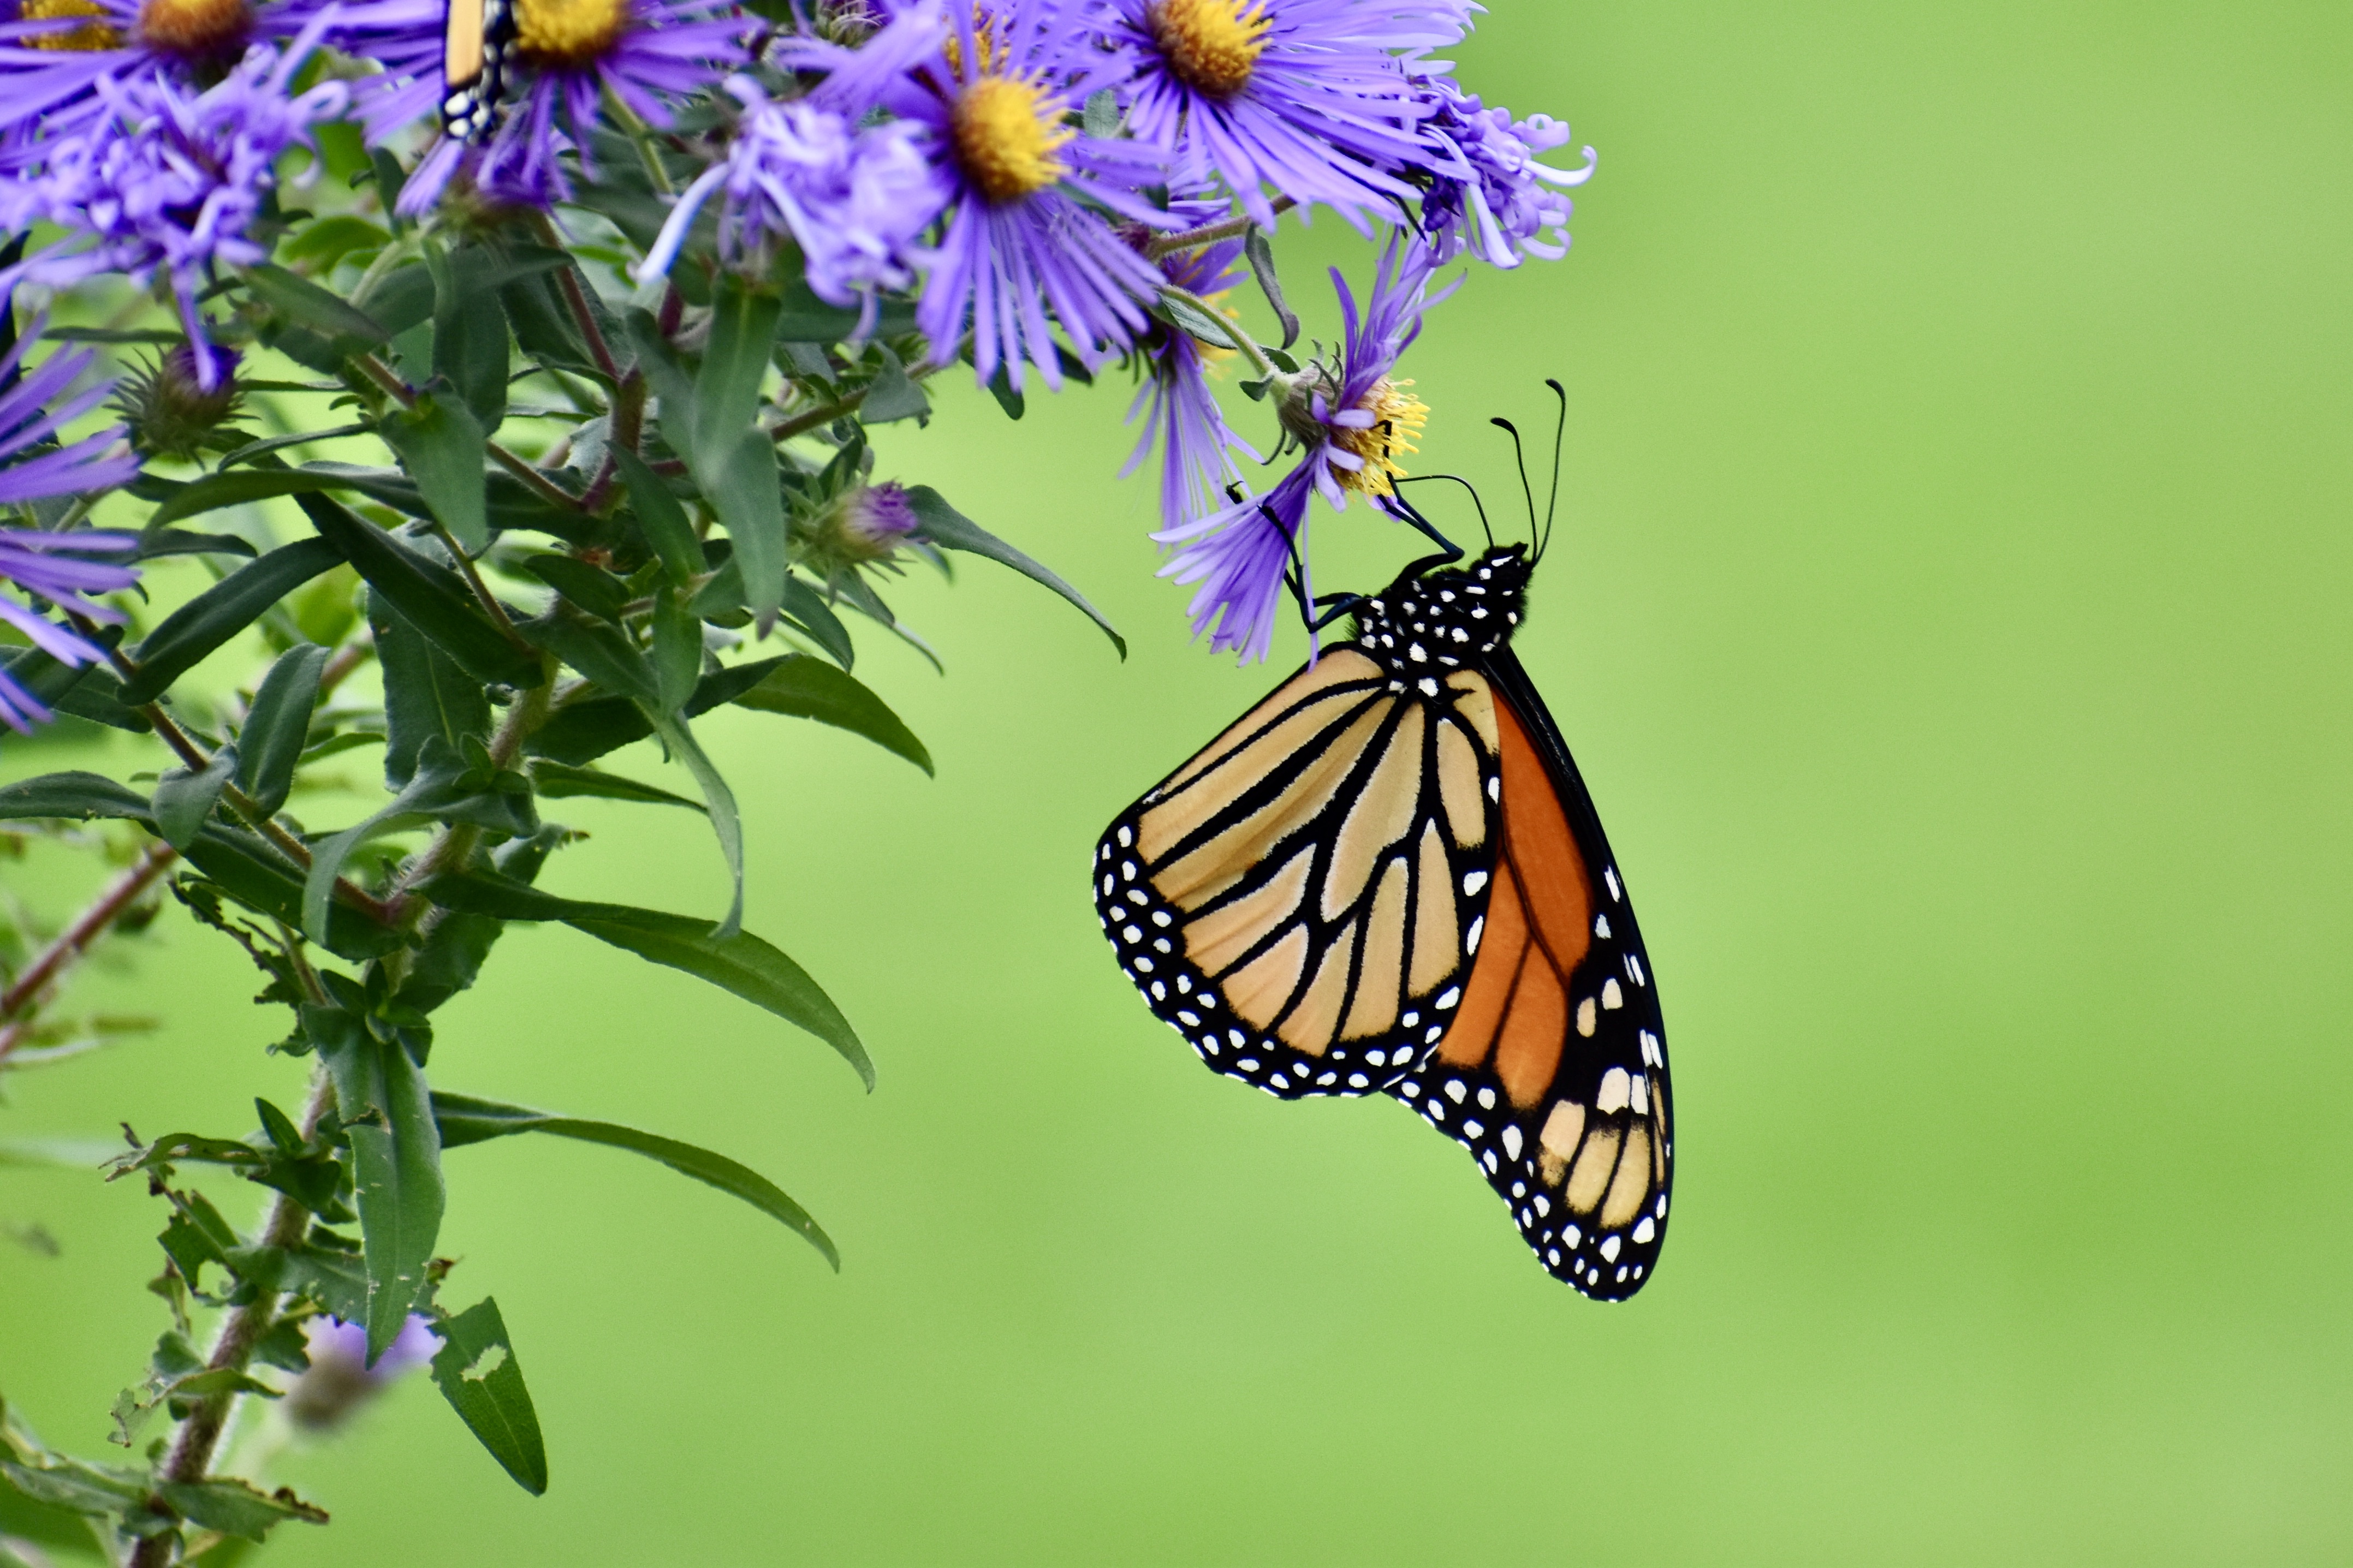 A monarch butterfly hangs off of the edge of a purple flower.